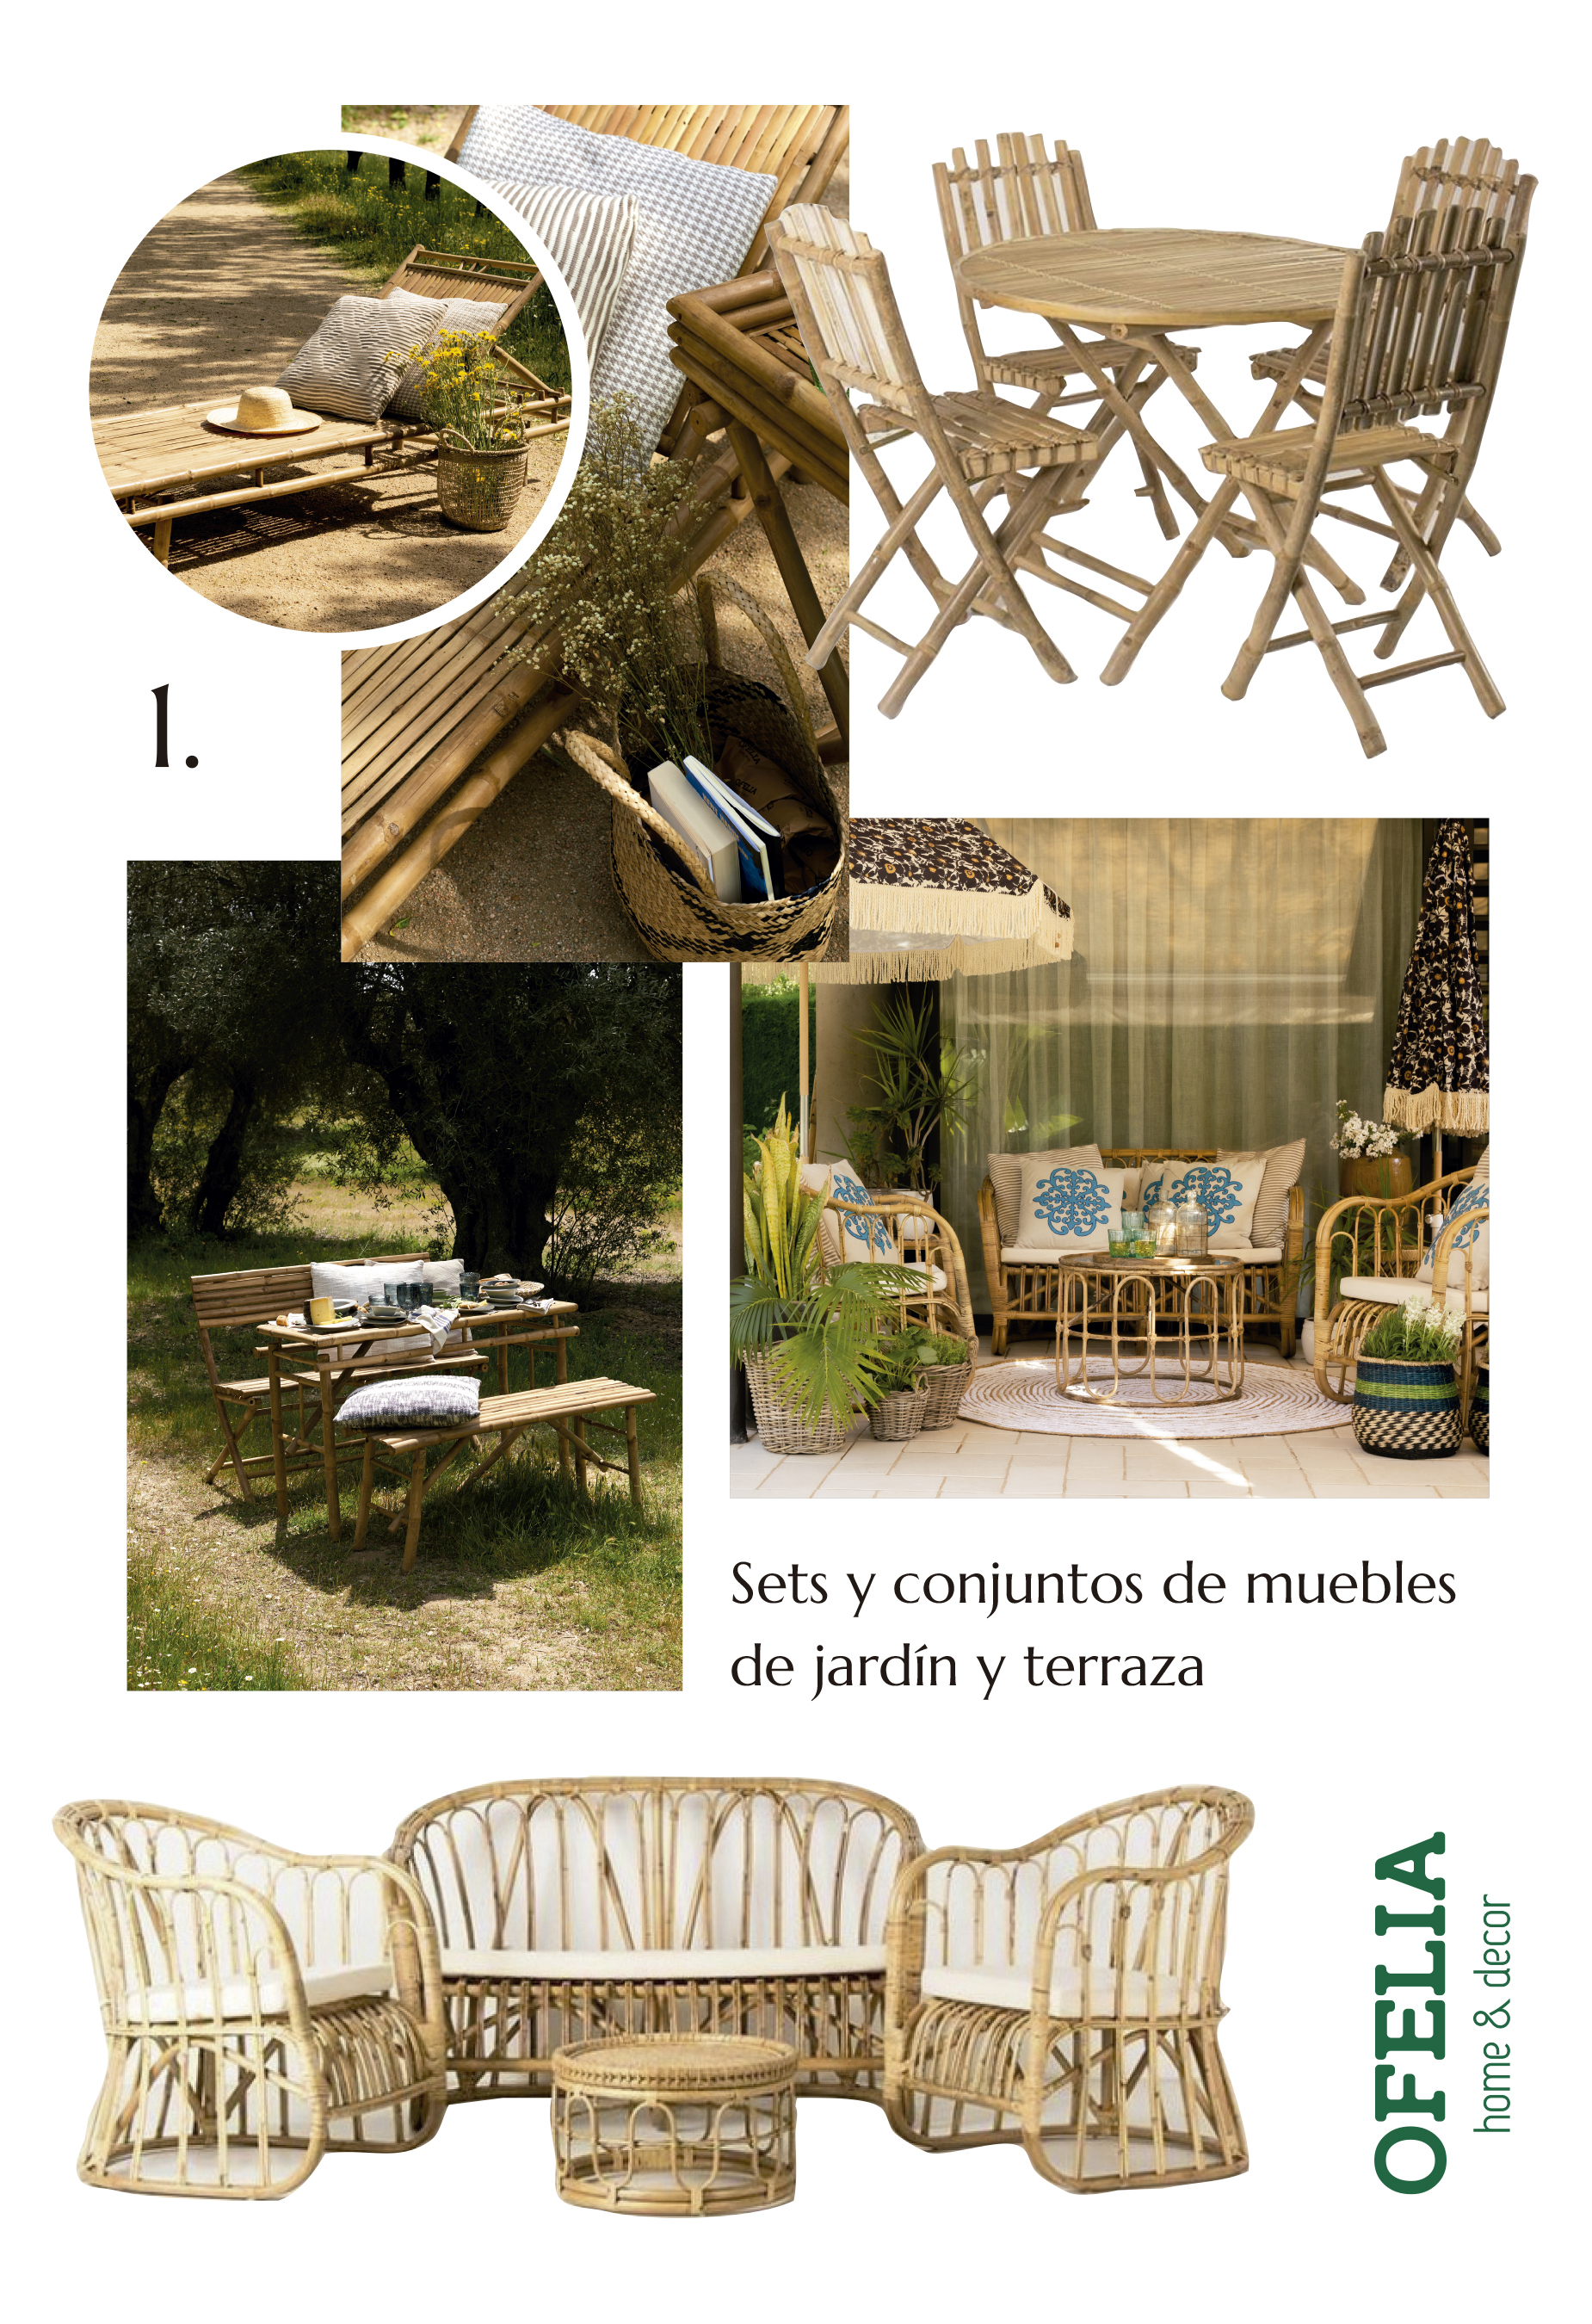 Outdoor furniture to decorate your terrace or garden - Ofelia Home ...